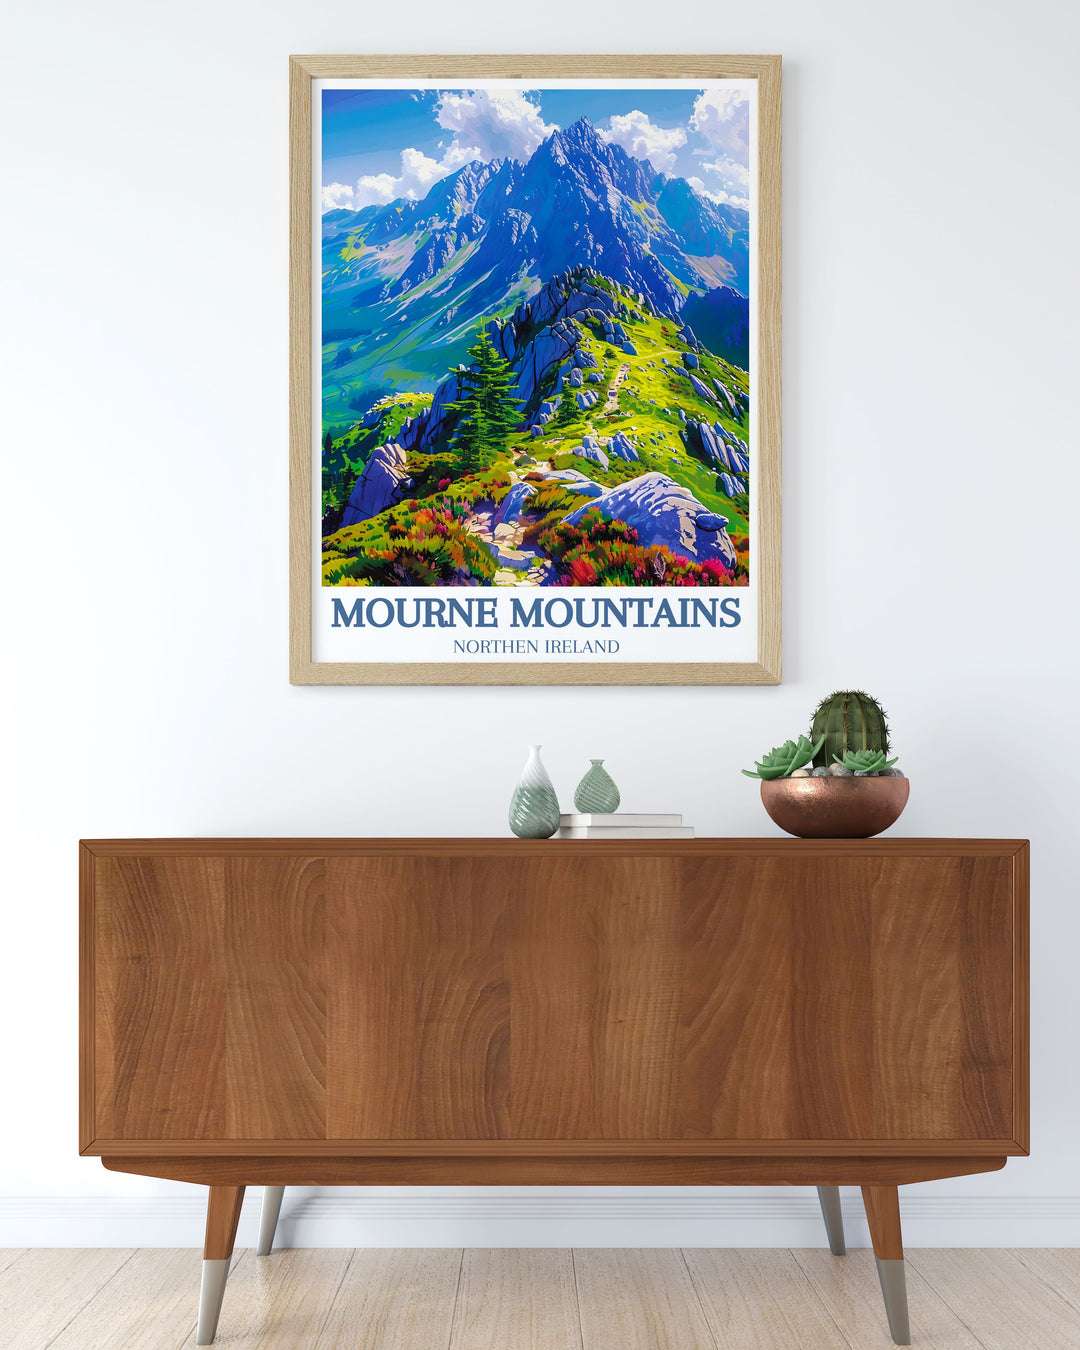 This detailed poster of the Mourne Mountains illustrates the dramatic peaks and rolling hills, making it an excellent addition to any art collection celebrating natural beauty.